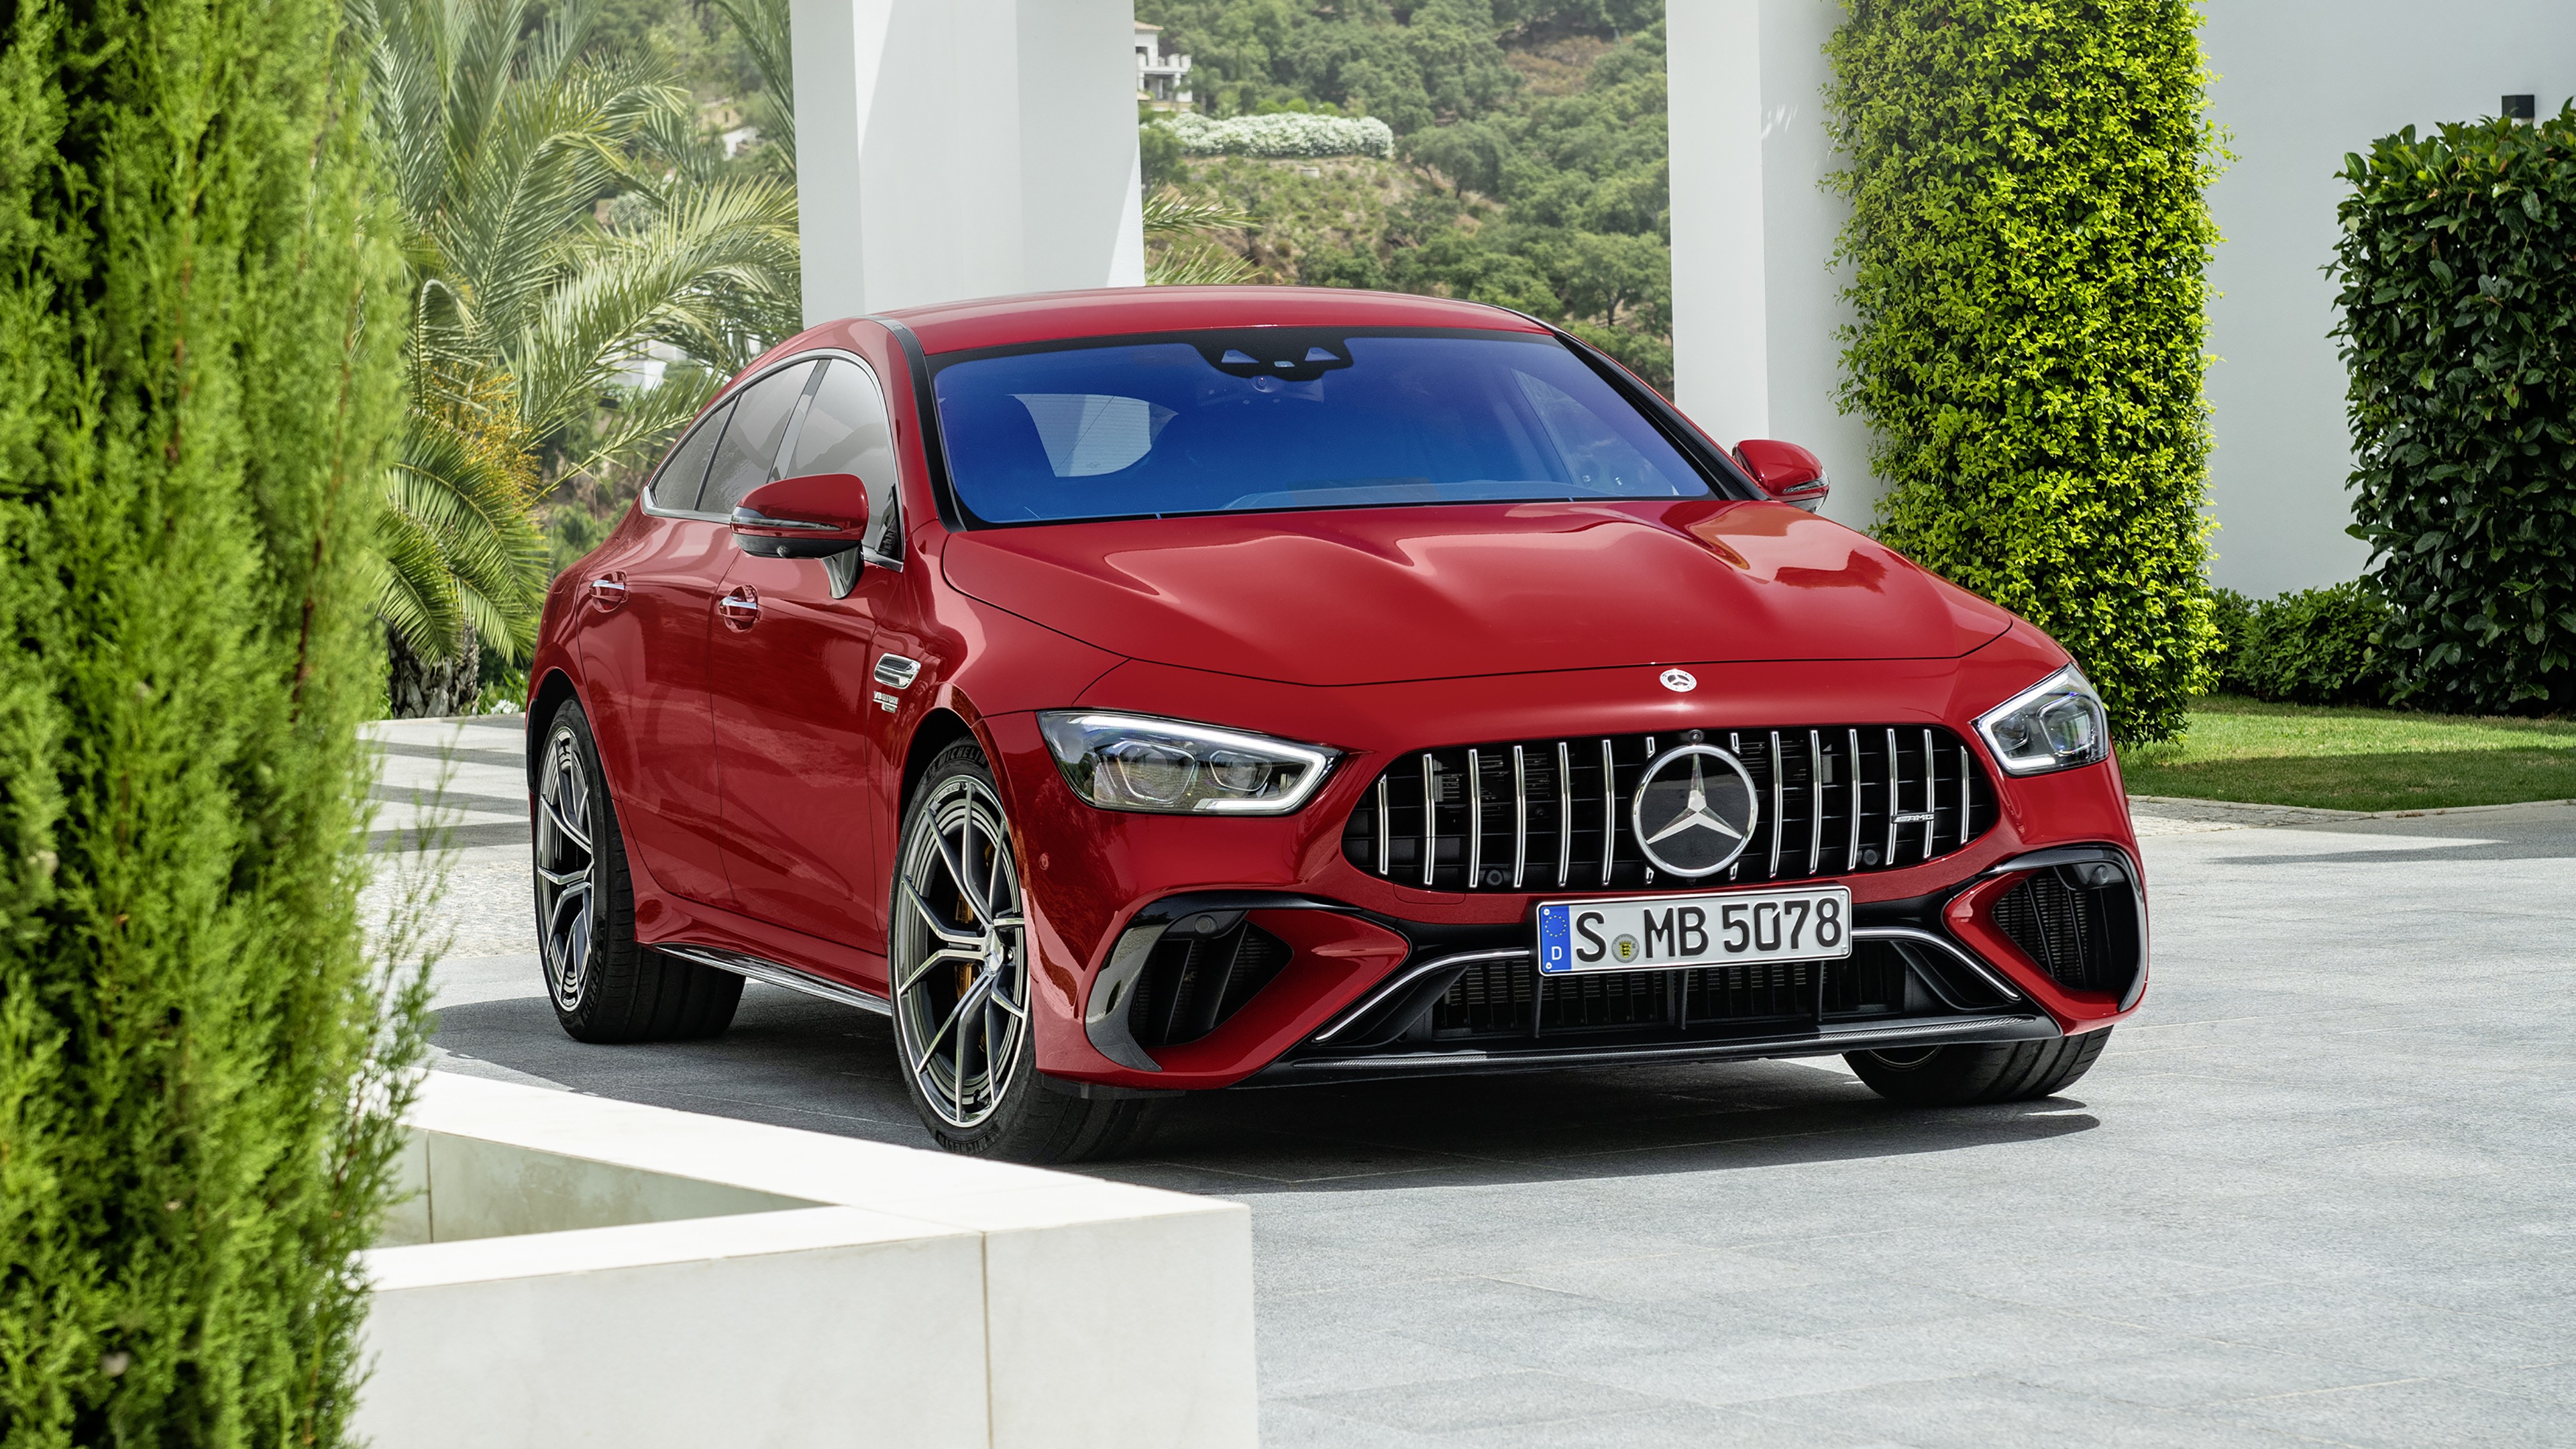 Mercedes AMG GT 63 S E Performance 4 Door Coupe 2021 4K HD Cars